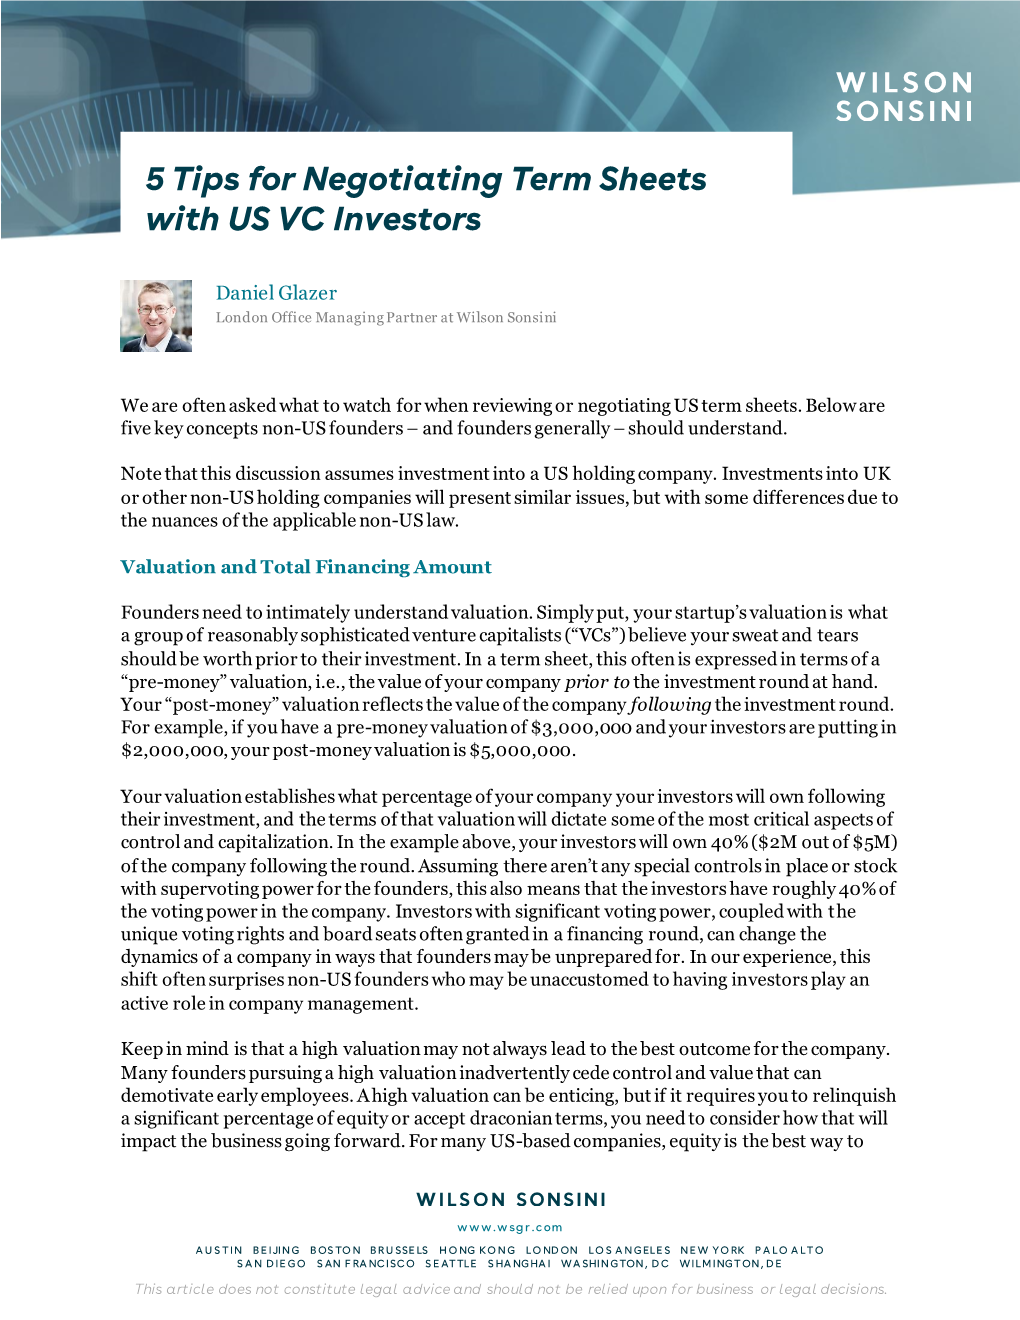 5 Tips for Negotiating Term Sheets with US VC Investors